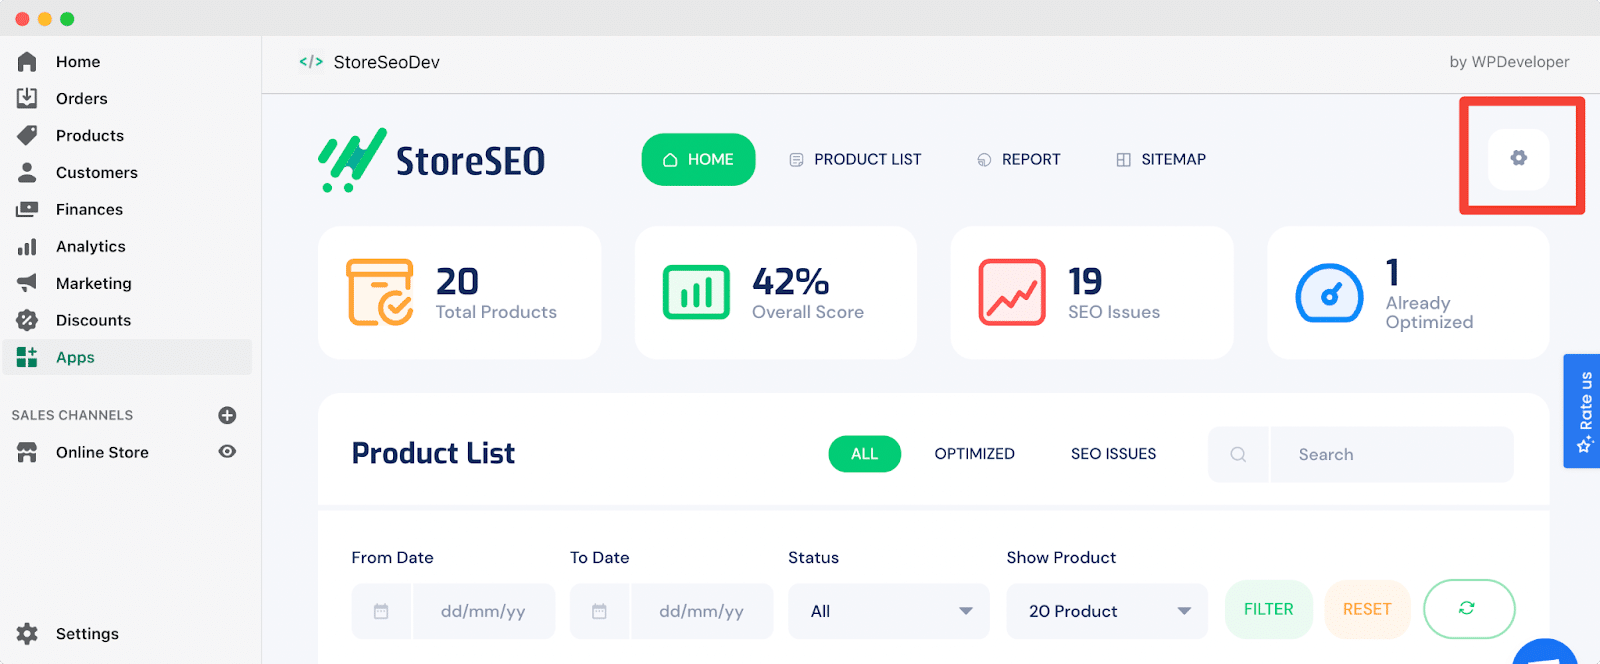 upgrade your StoreSEO plan